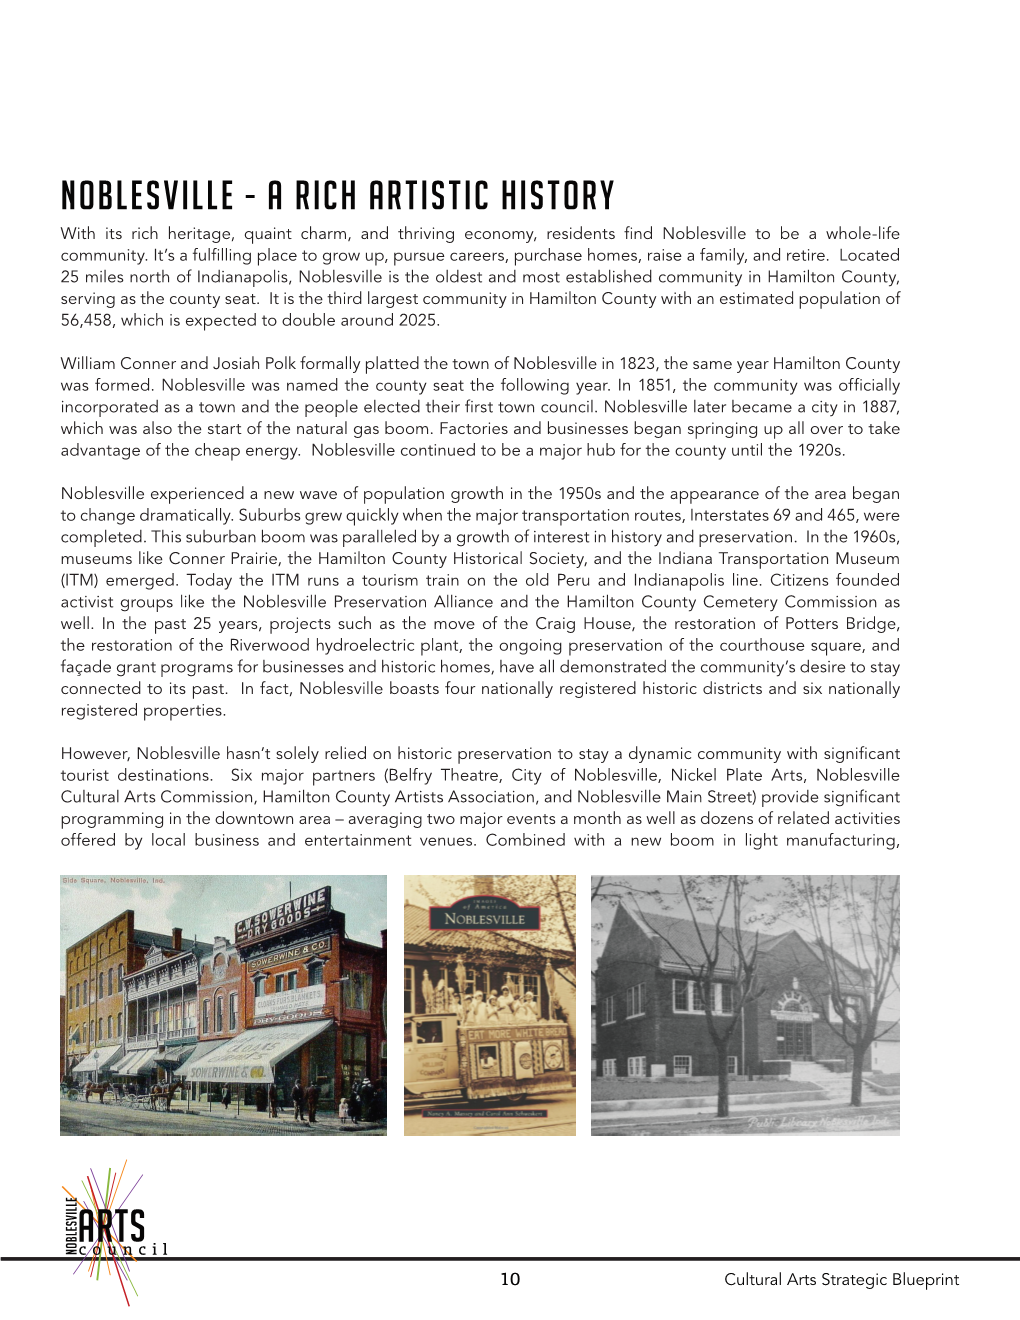 A Rich Artistic History with Its Rich Heritage, Quaint Charm, and Thriving Economy, Residents Find Noblesville to Be a Whole-Life Community